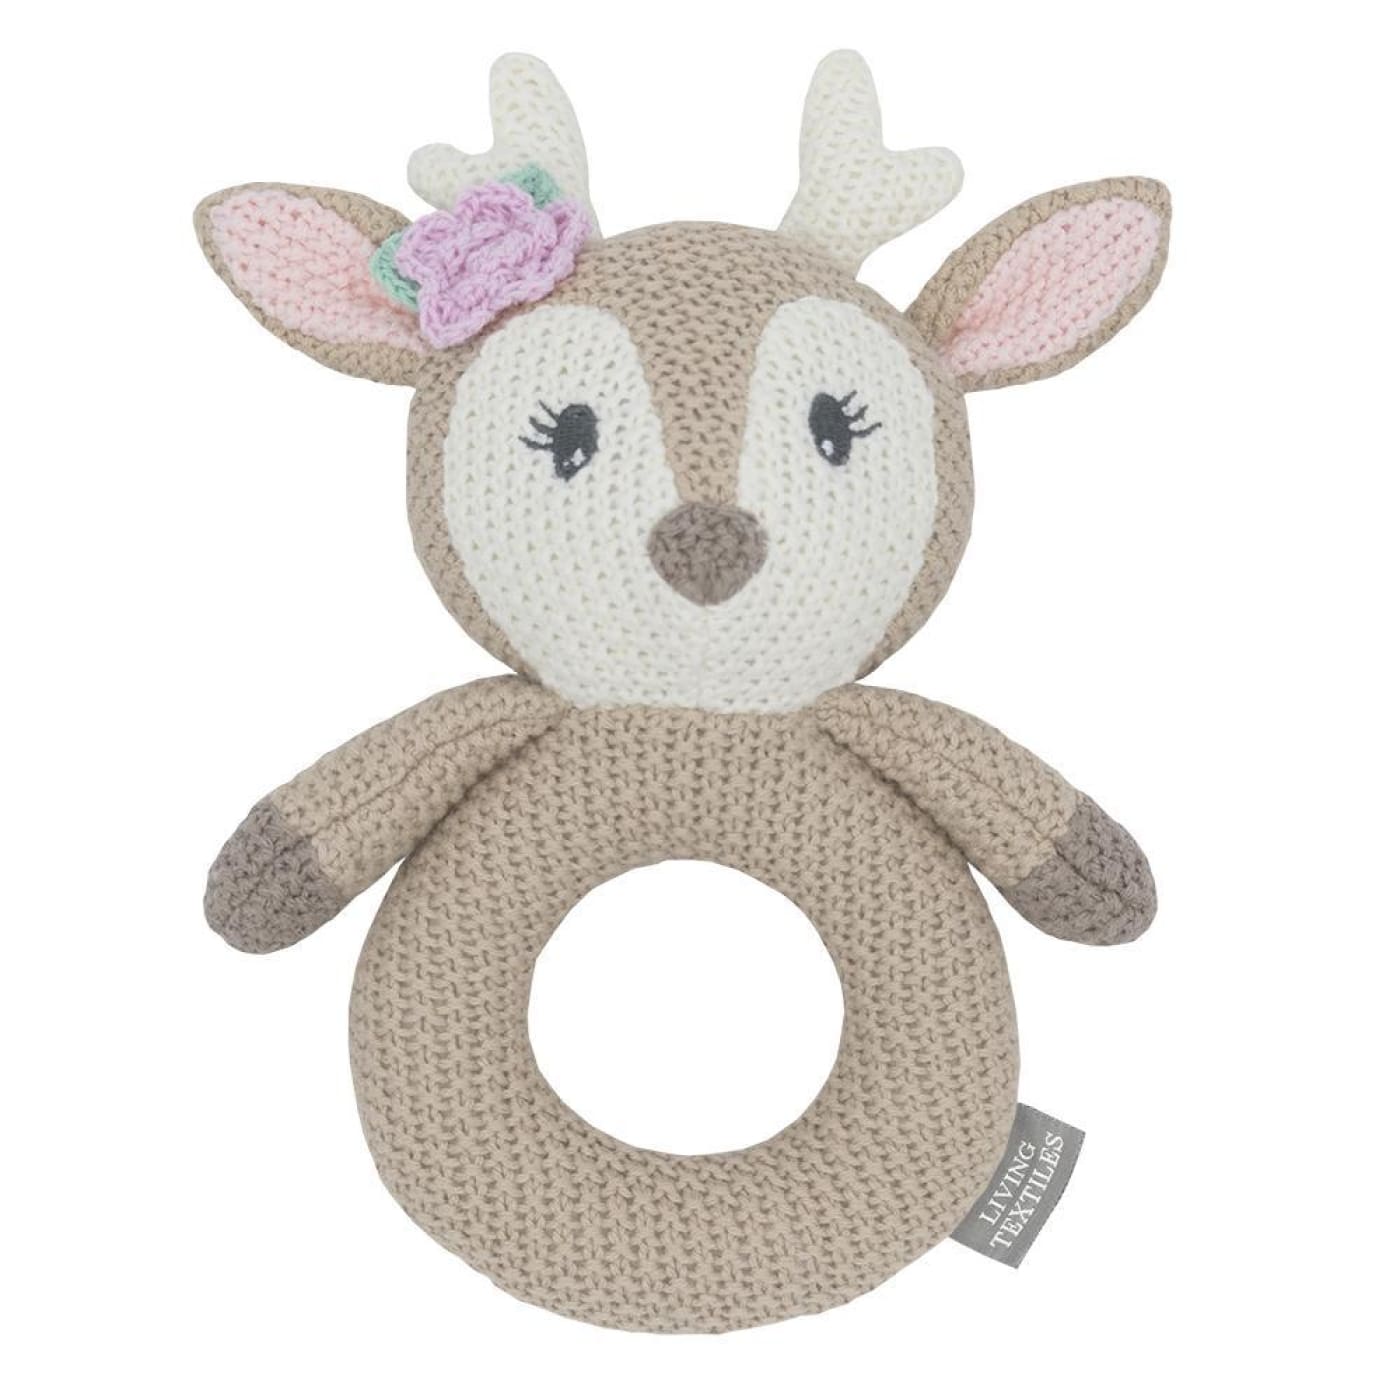 Living Textiles Whimsical Knitted Ring Rattle - Ava Fawn - Ava Fawn - TOYS & PLAY - BLANKIES/COMFORTERS/RATTLES